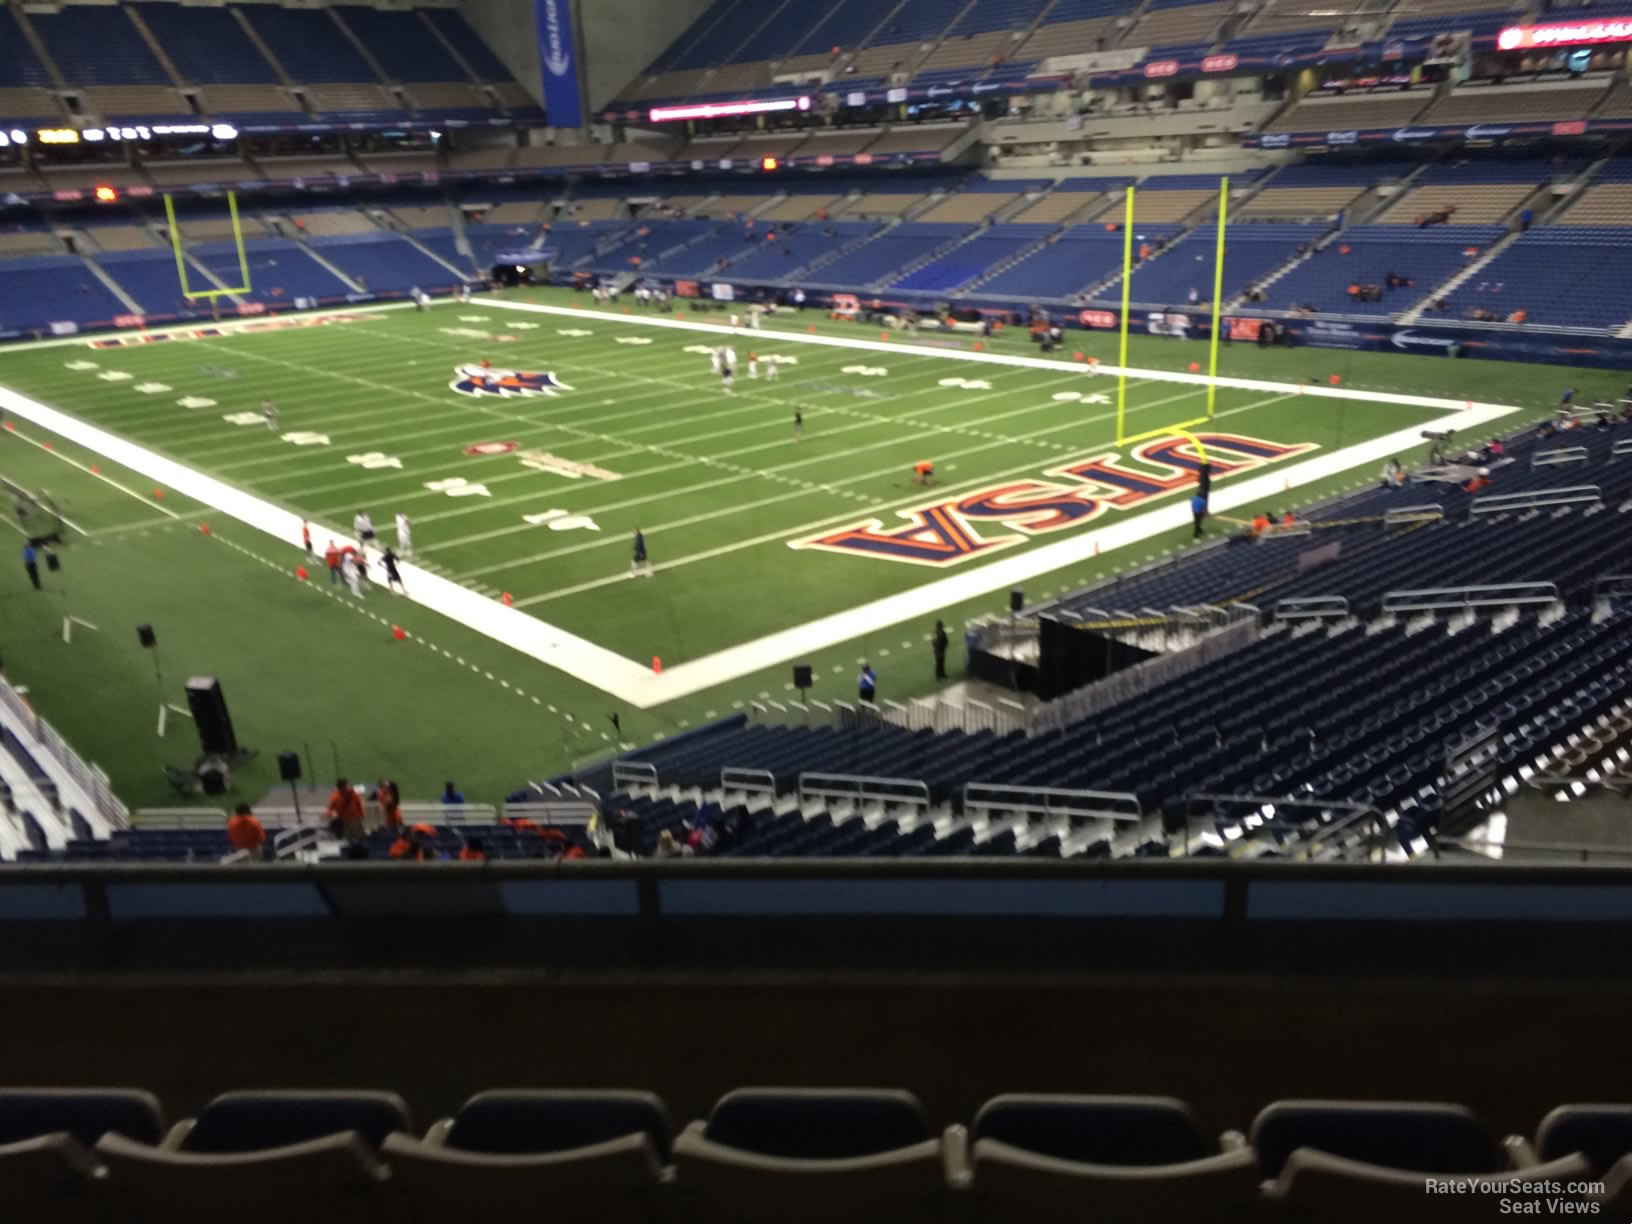 section 227, row 5 seat view  for football - alamodome